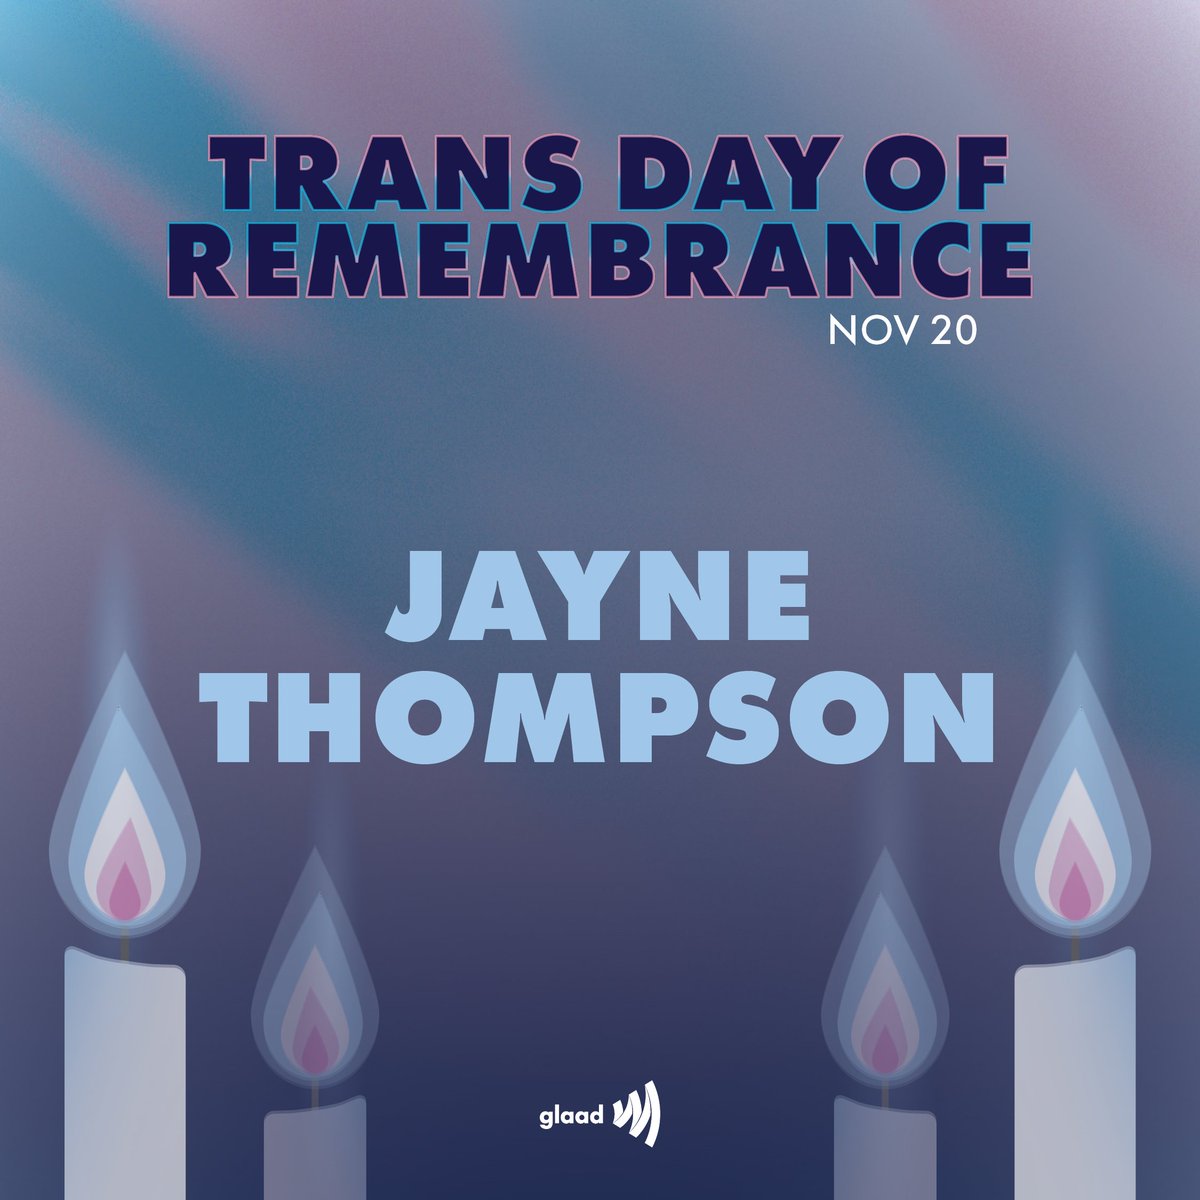 Jayne Thompson, a transgender woman, was killed in Mesa County, Colorado on May 9, 2020. She was 33 years old.